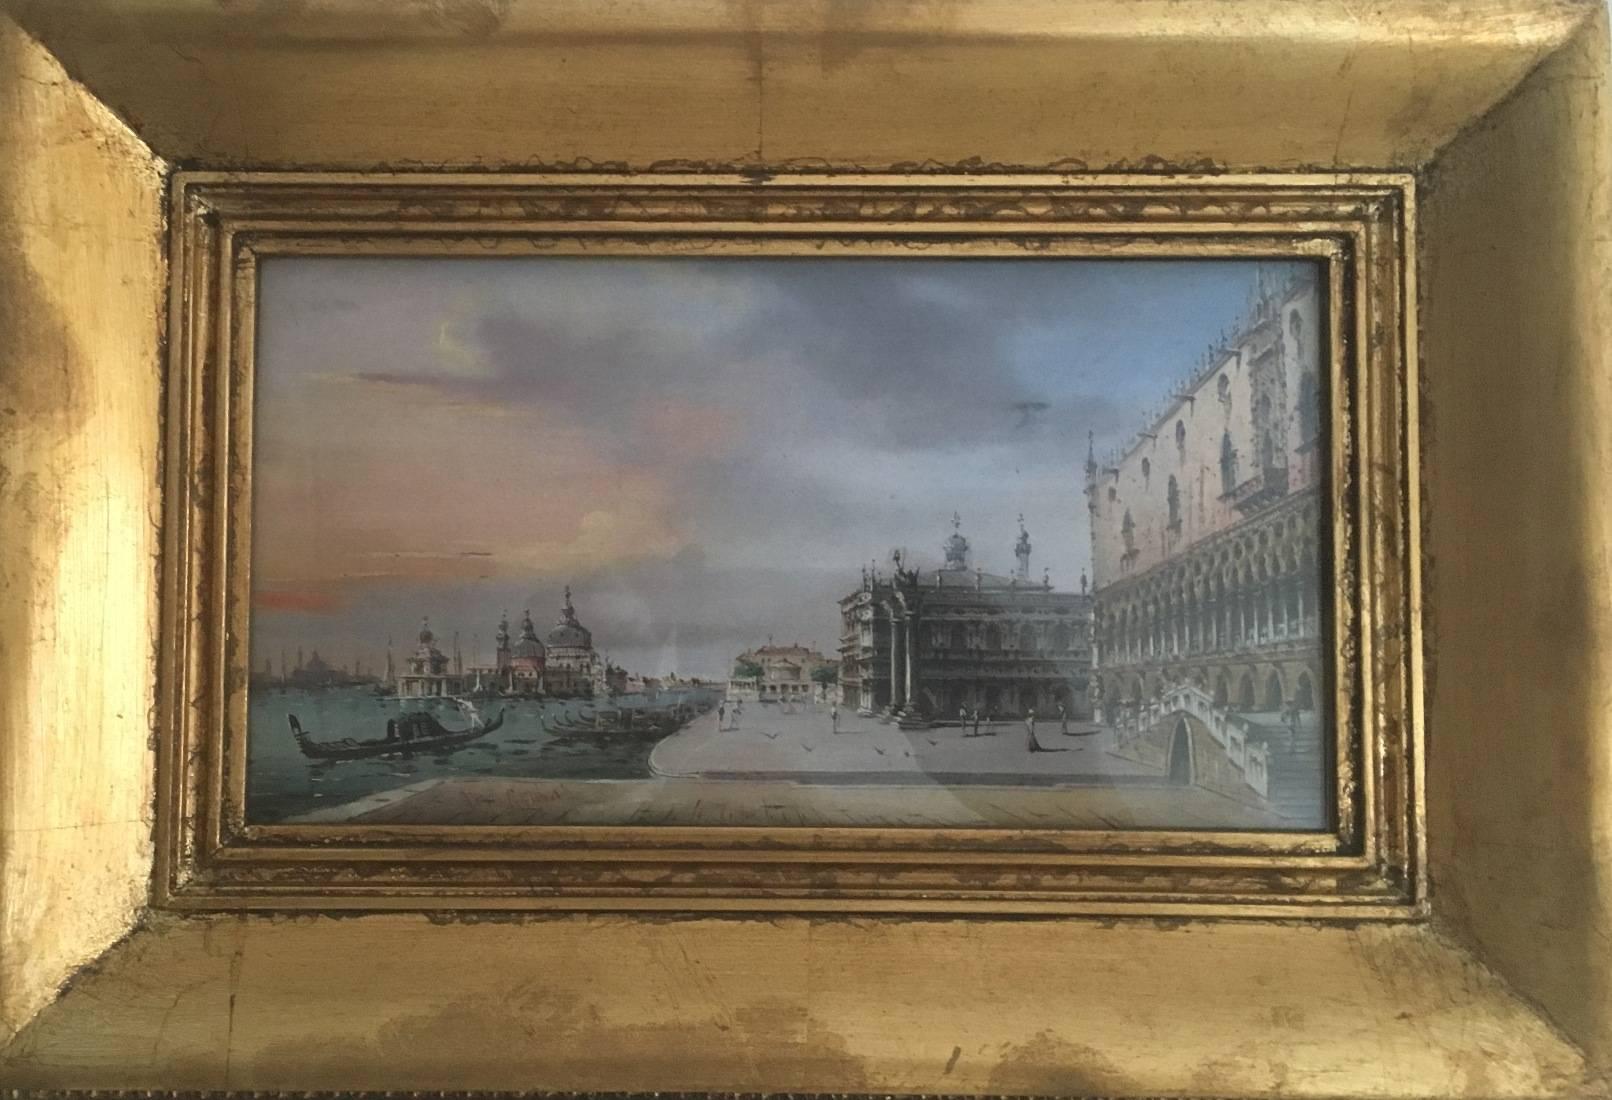 MarCo Grubacs (Italian, 1839-1910), two views of Venice, oil on wood panel, signed. 

Two oil on wood panel paintings under glass, each signed M Grubas, lower left, in oil. View of the Grand Canal and The Bacino di San MarCo.

Each: 
Height 5.5